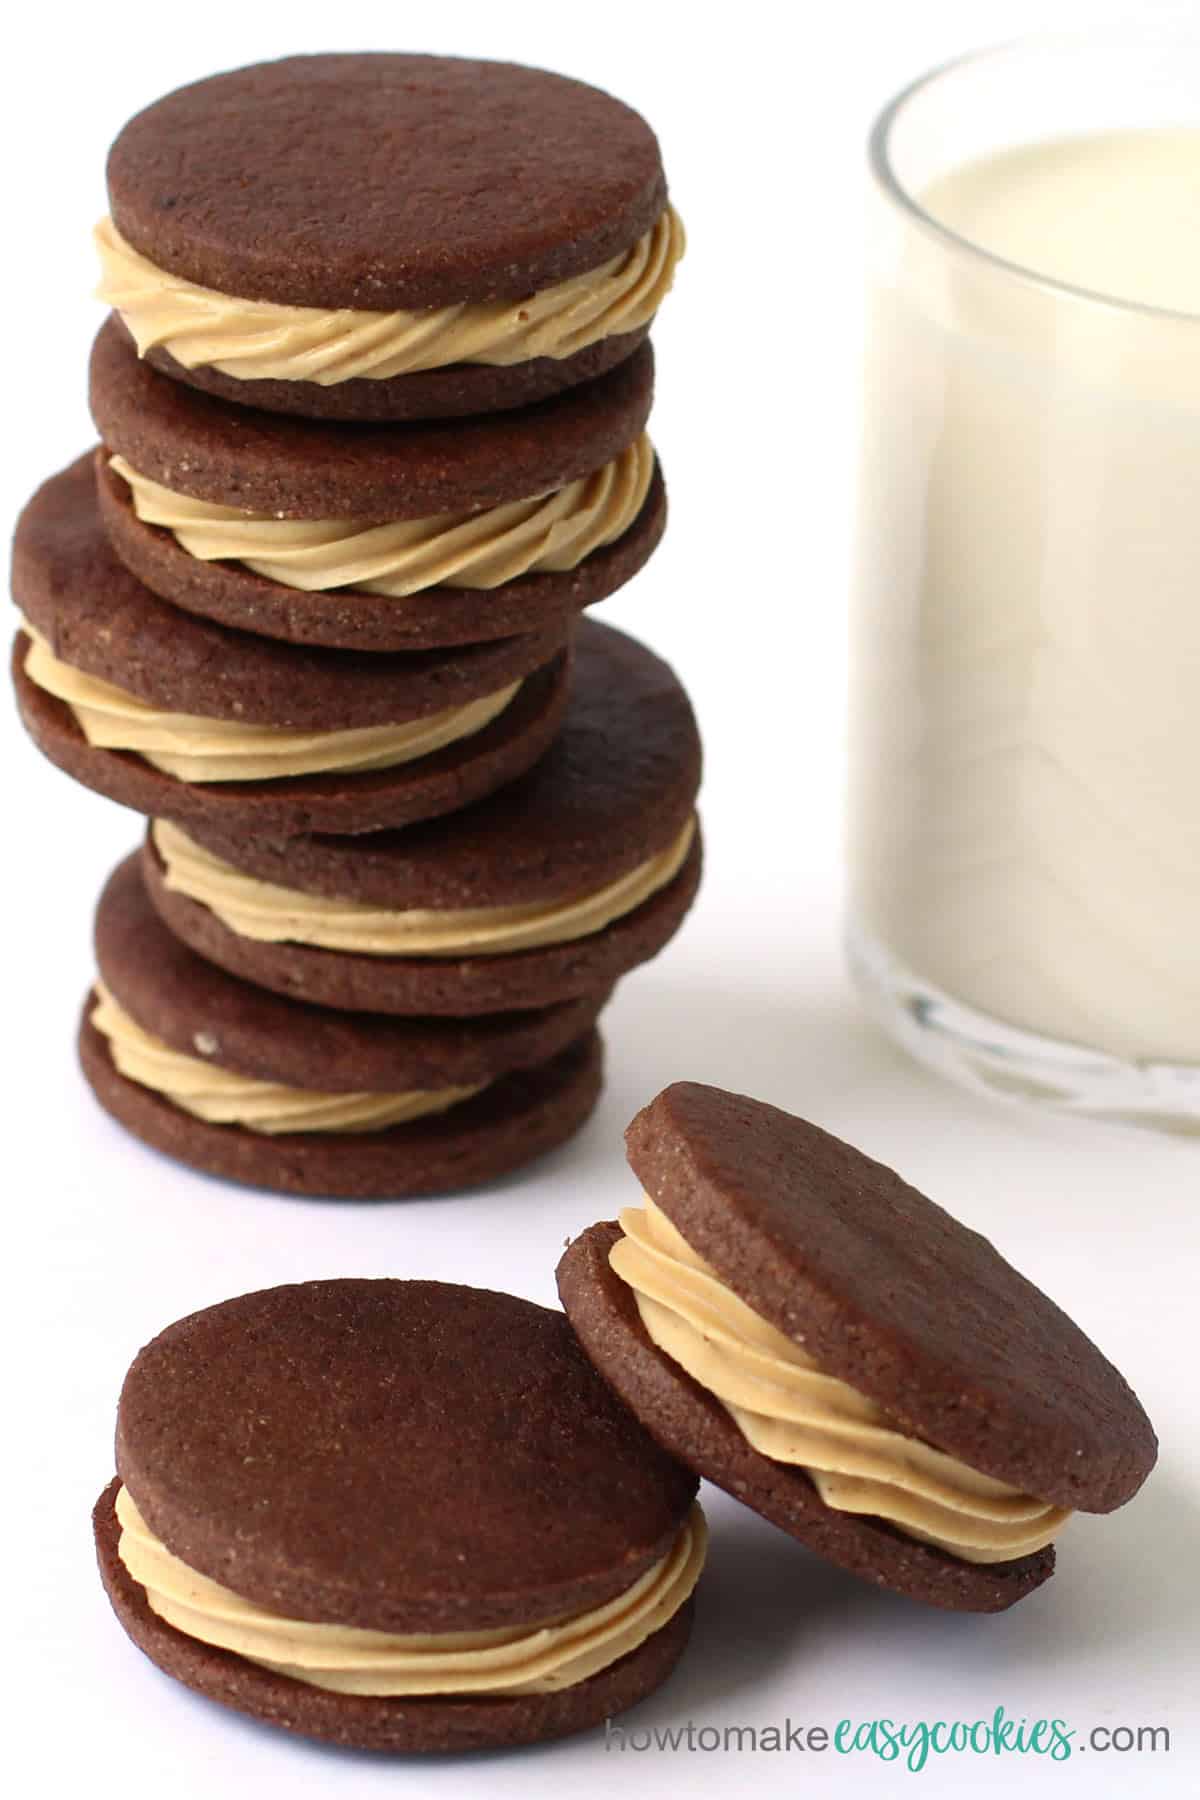 Homemade chocolate sandwich cookies filled with peanut butter fudge served with a glass of milk.